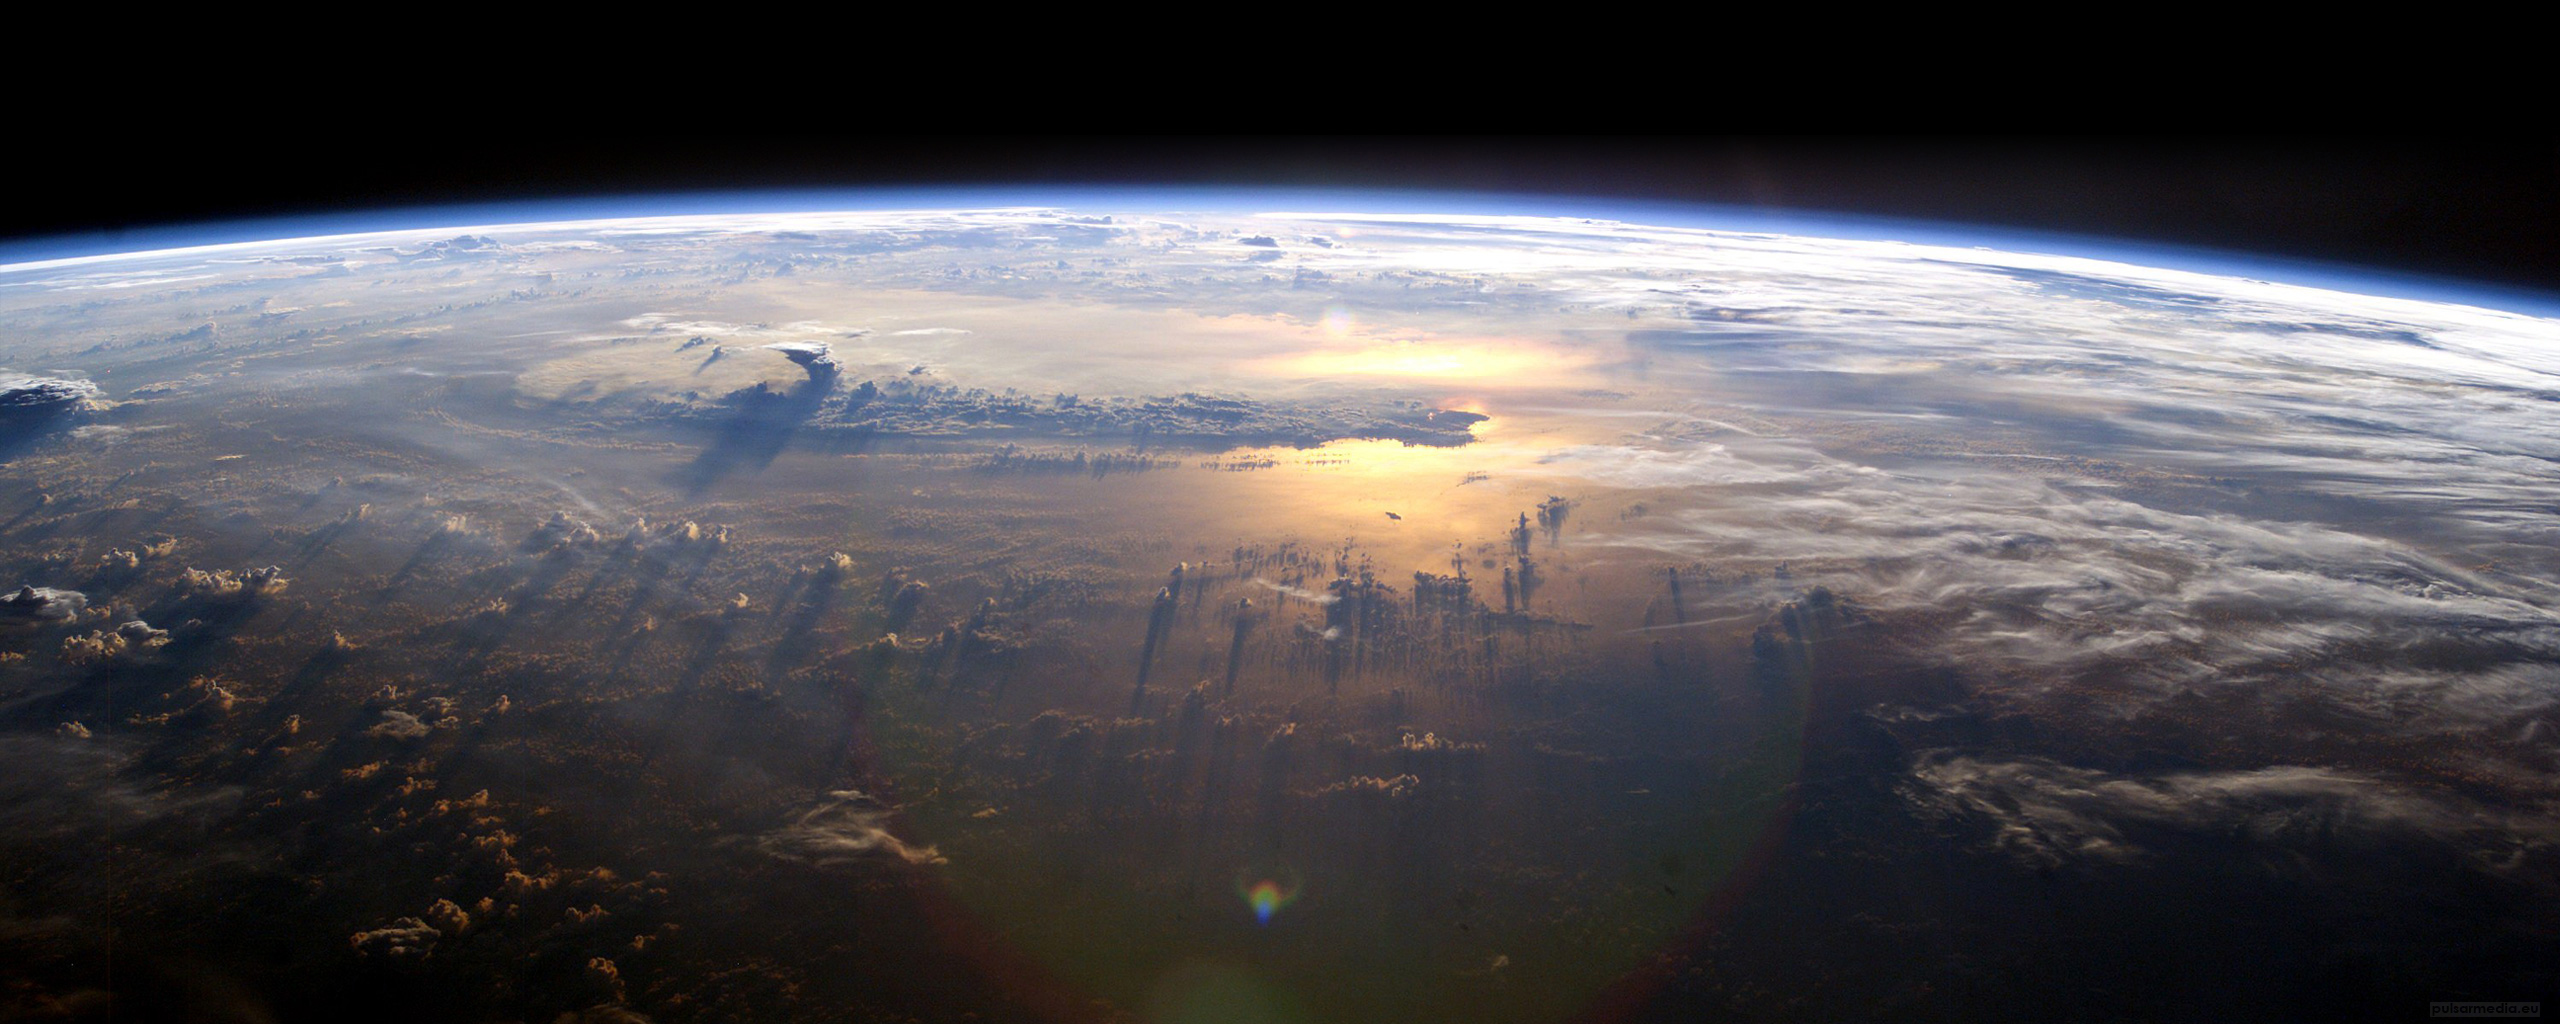 Earth From Space Dual Screen Wallpaper